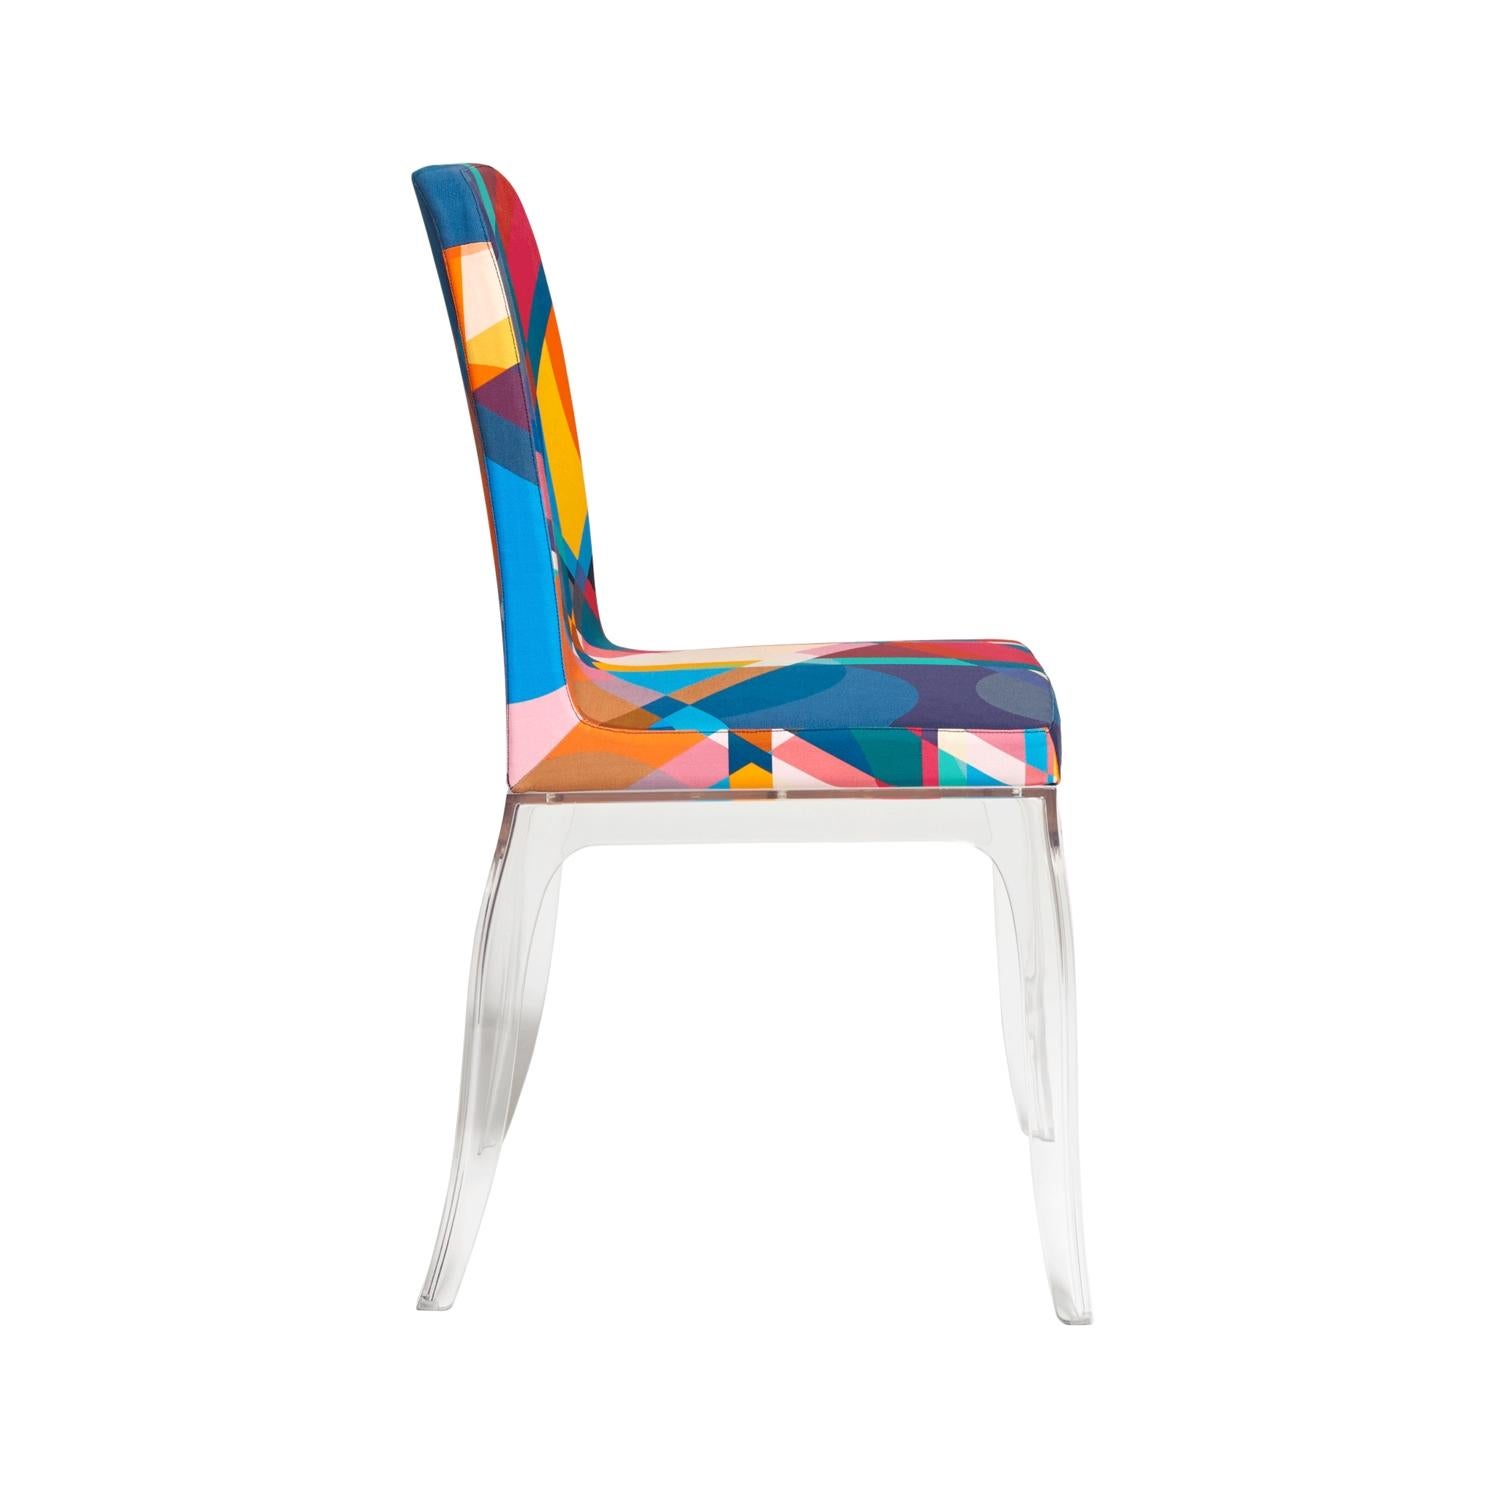 Modern Moibibi Colorful Dining Chair, Designed by Marcel Wanders, Made in Italy